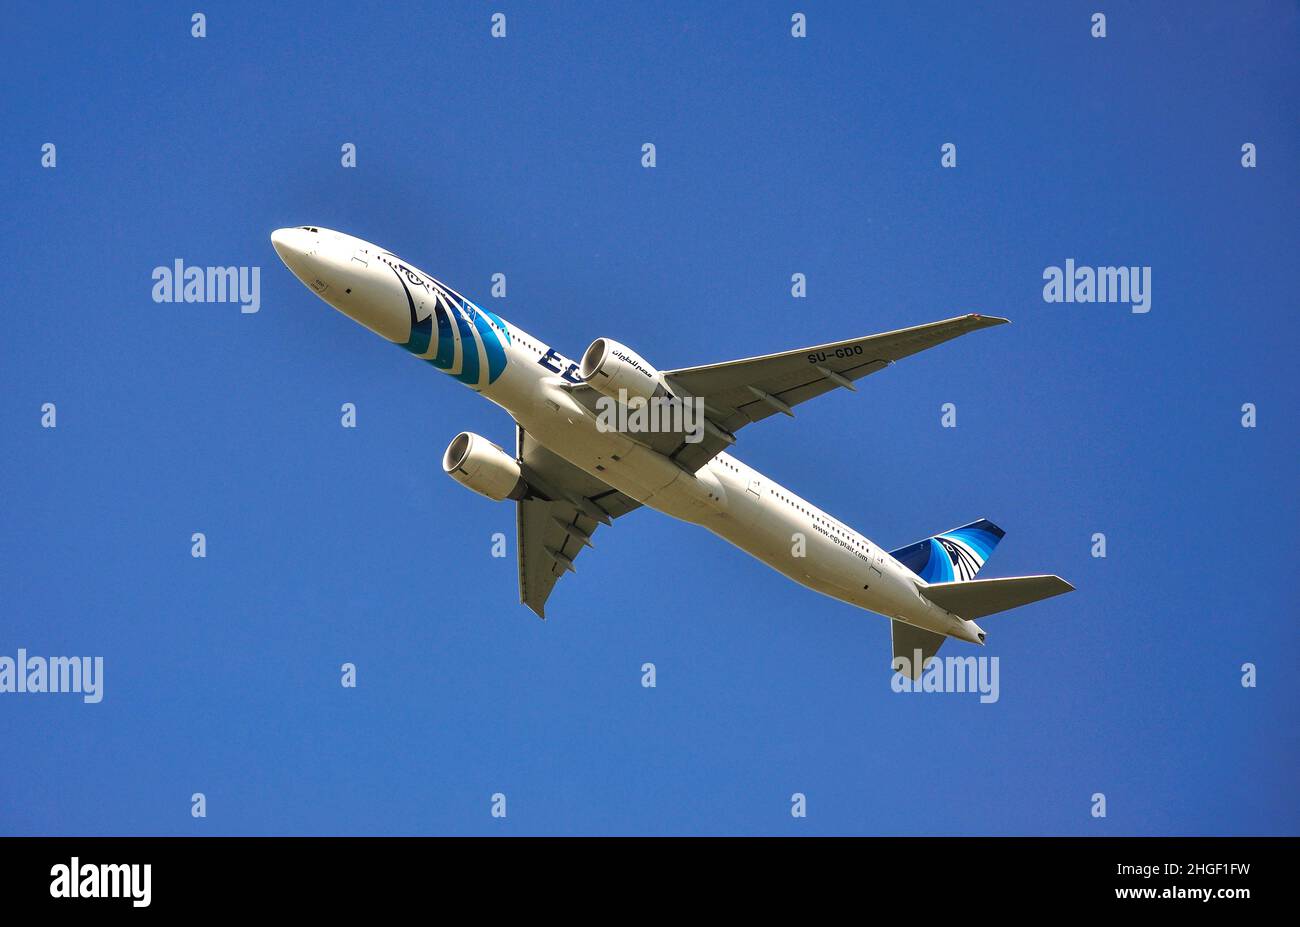 Egyptair Boeing 777 aircraft taking off from Heathrow Airport, Greater London, England, United Kingdom Stock Photo